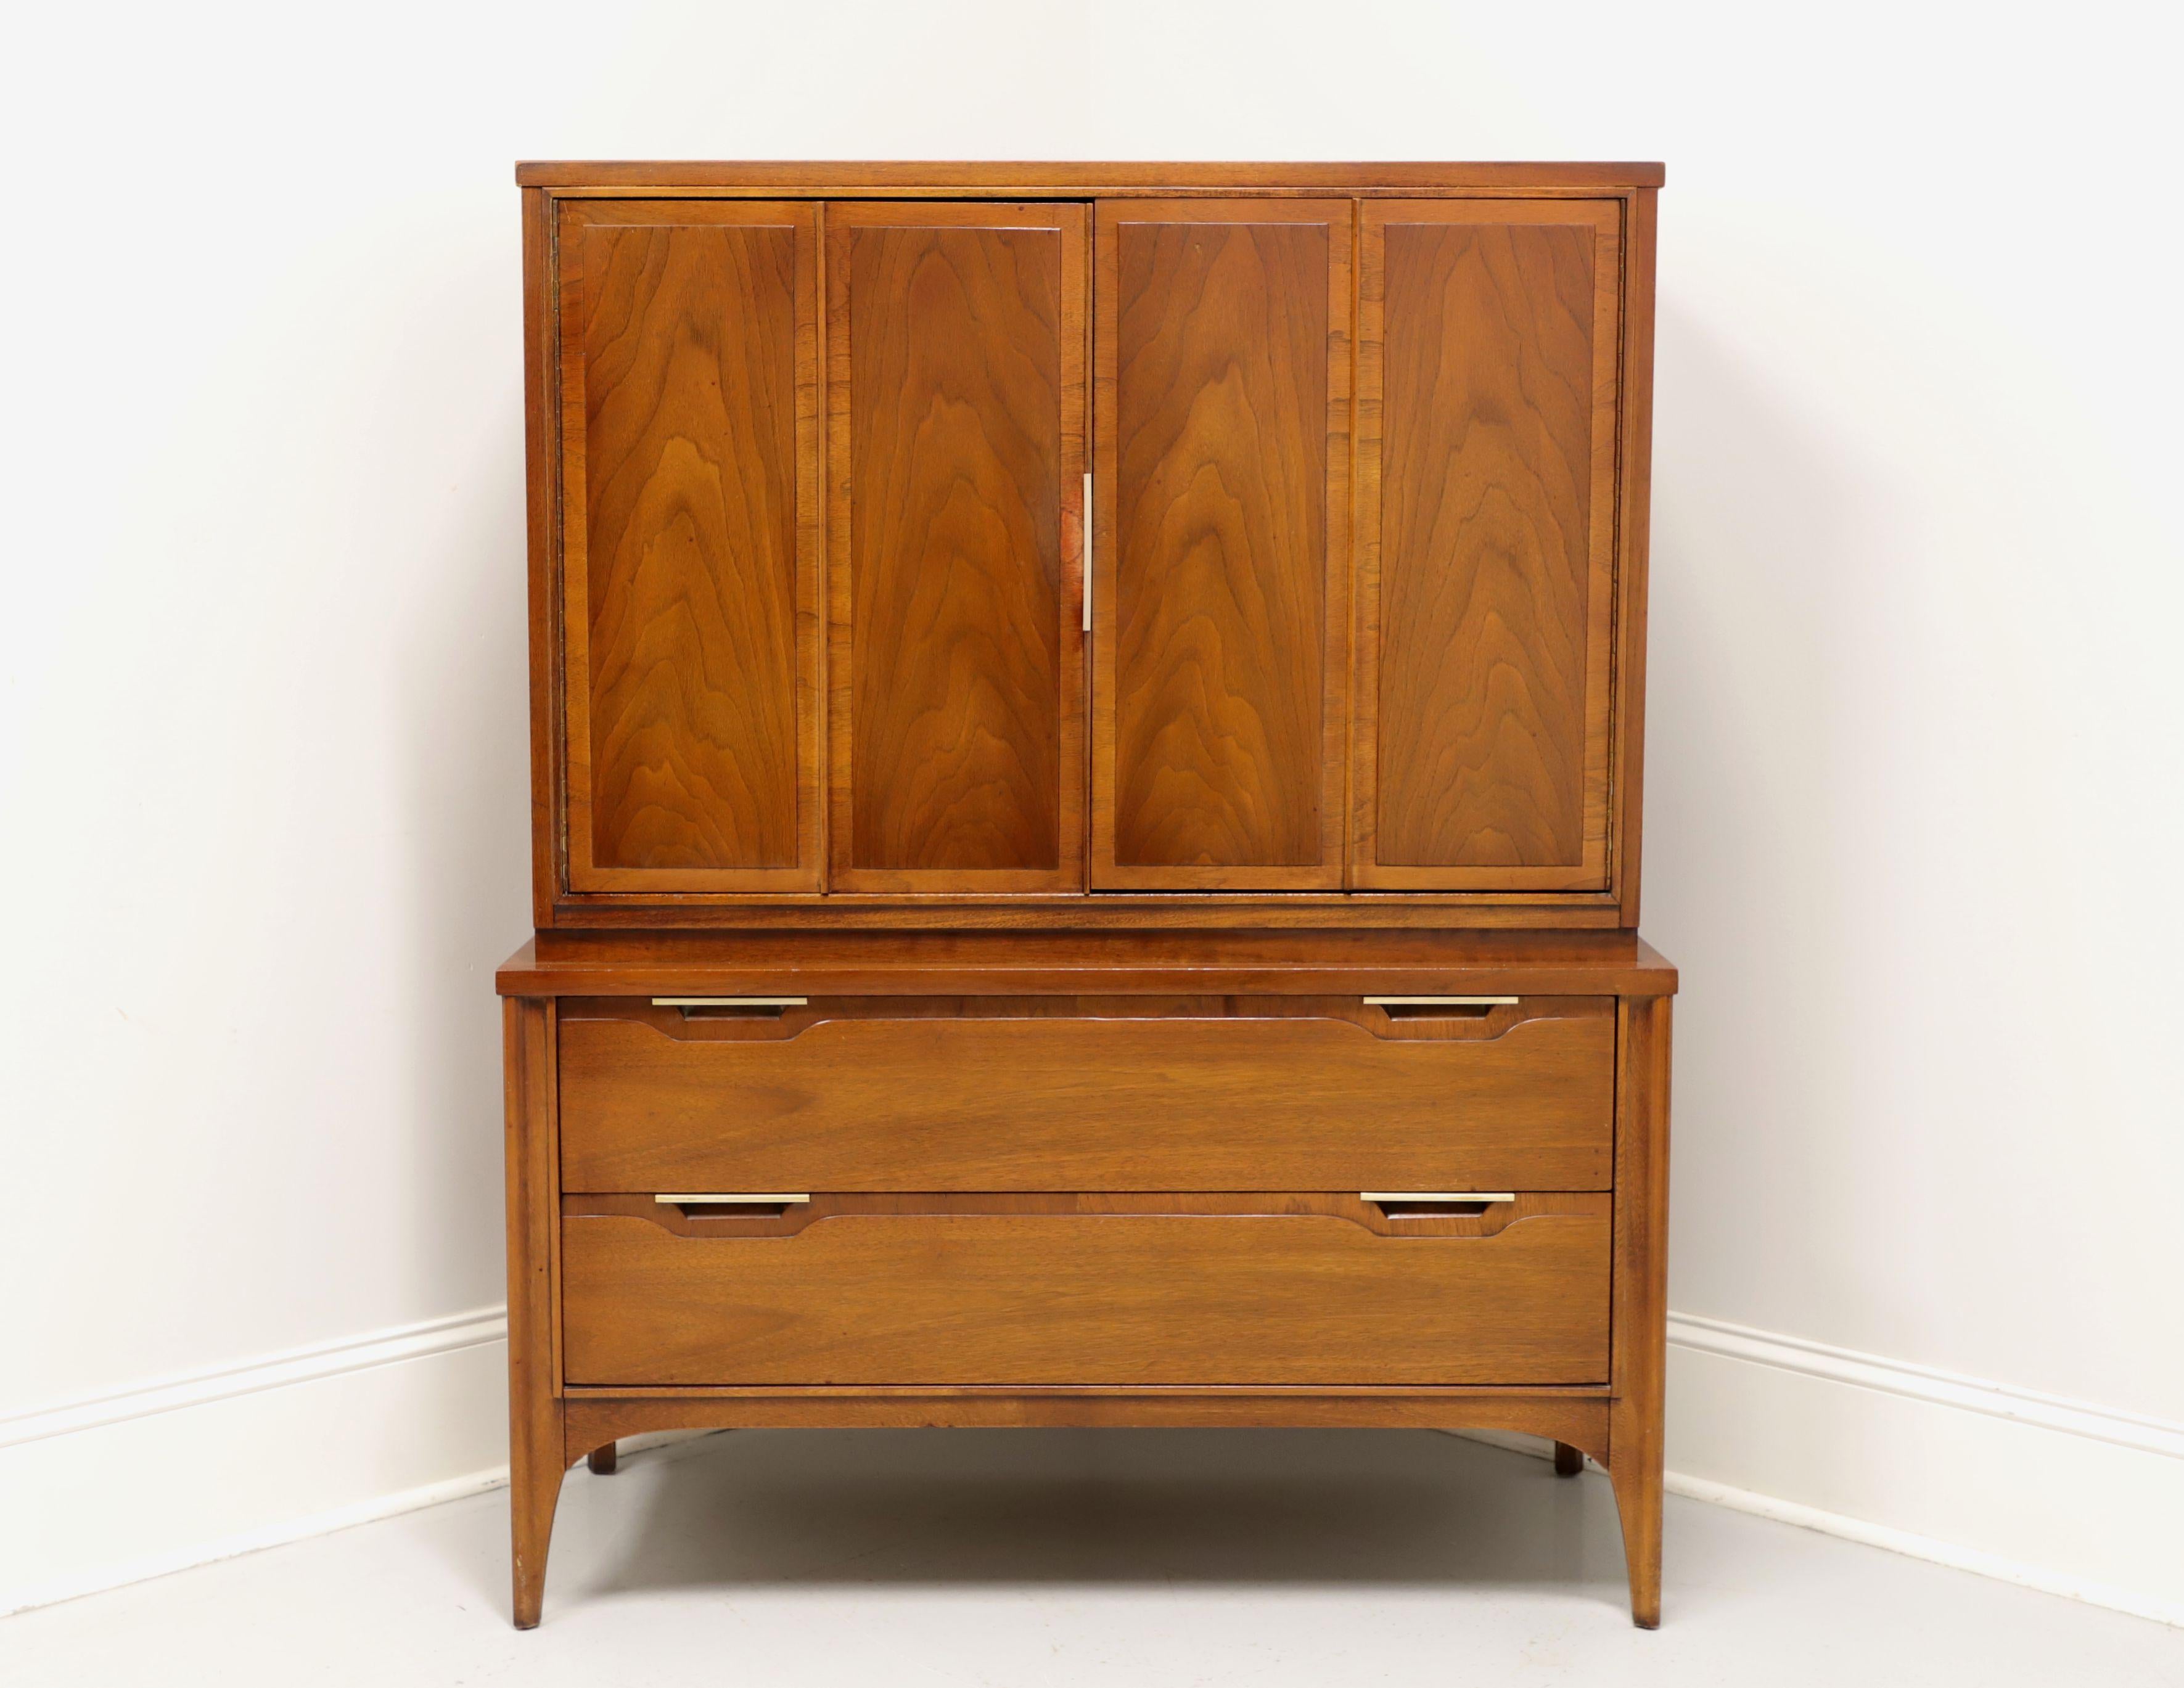 A Mid Century Modern gentleman's chest by Kent Coffey, of Lenoir, North Carolina, USA, from their Impact line. Walnut, elm and brass hardware with banded door fronts. Features upper section with dual doors revealing three fixed cubbies and two